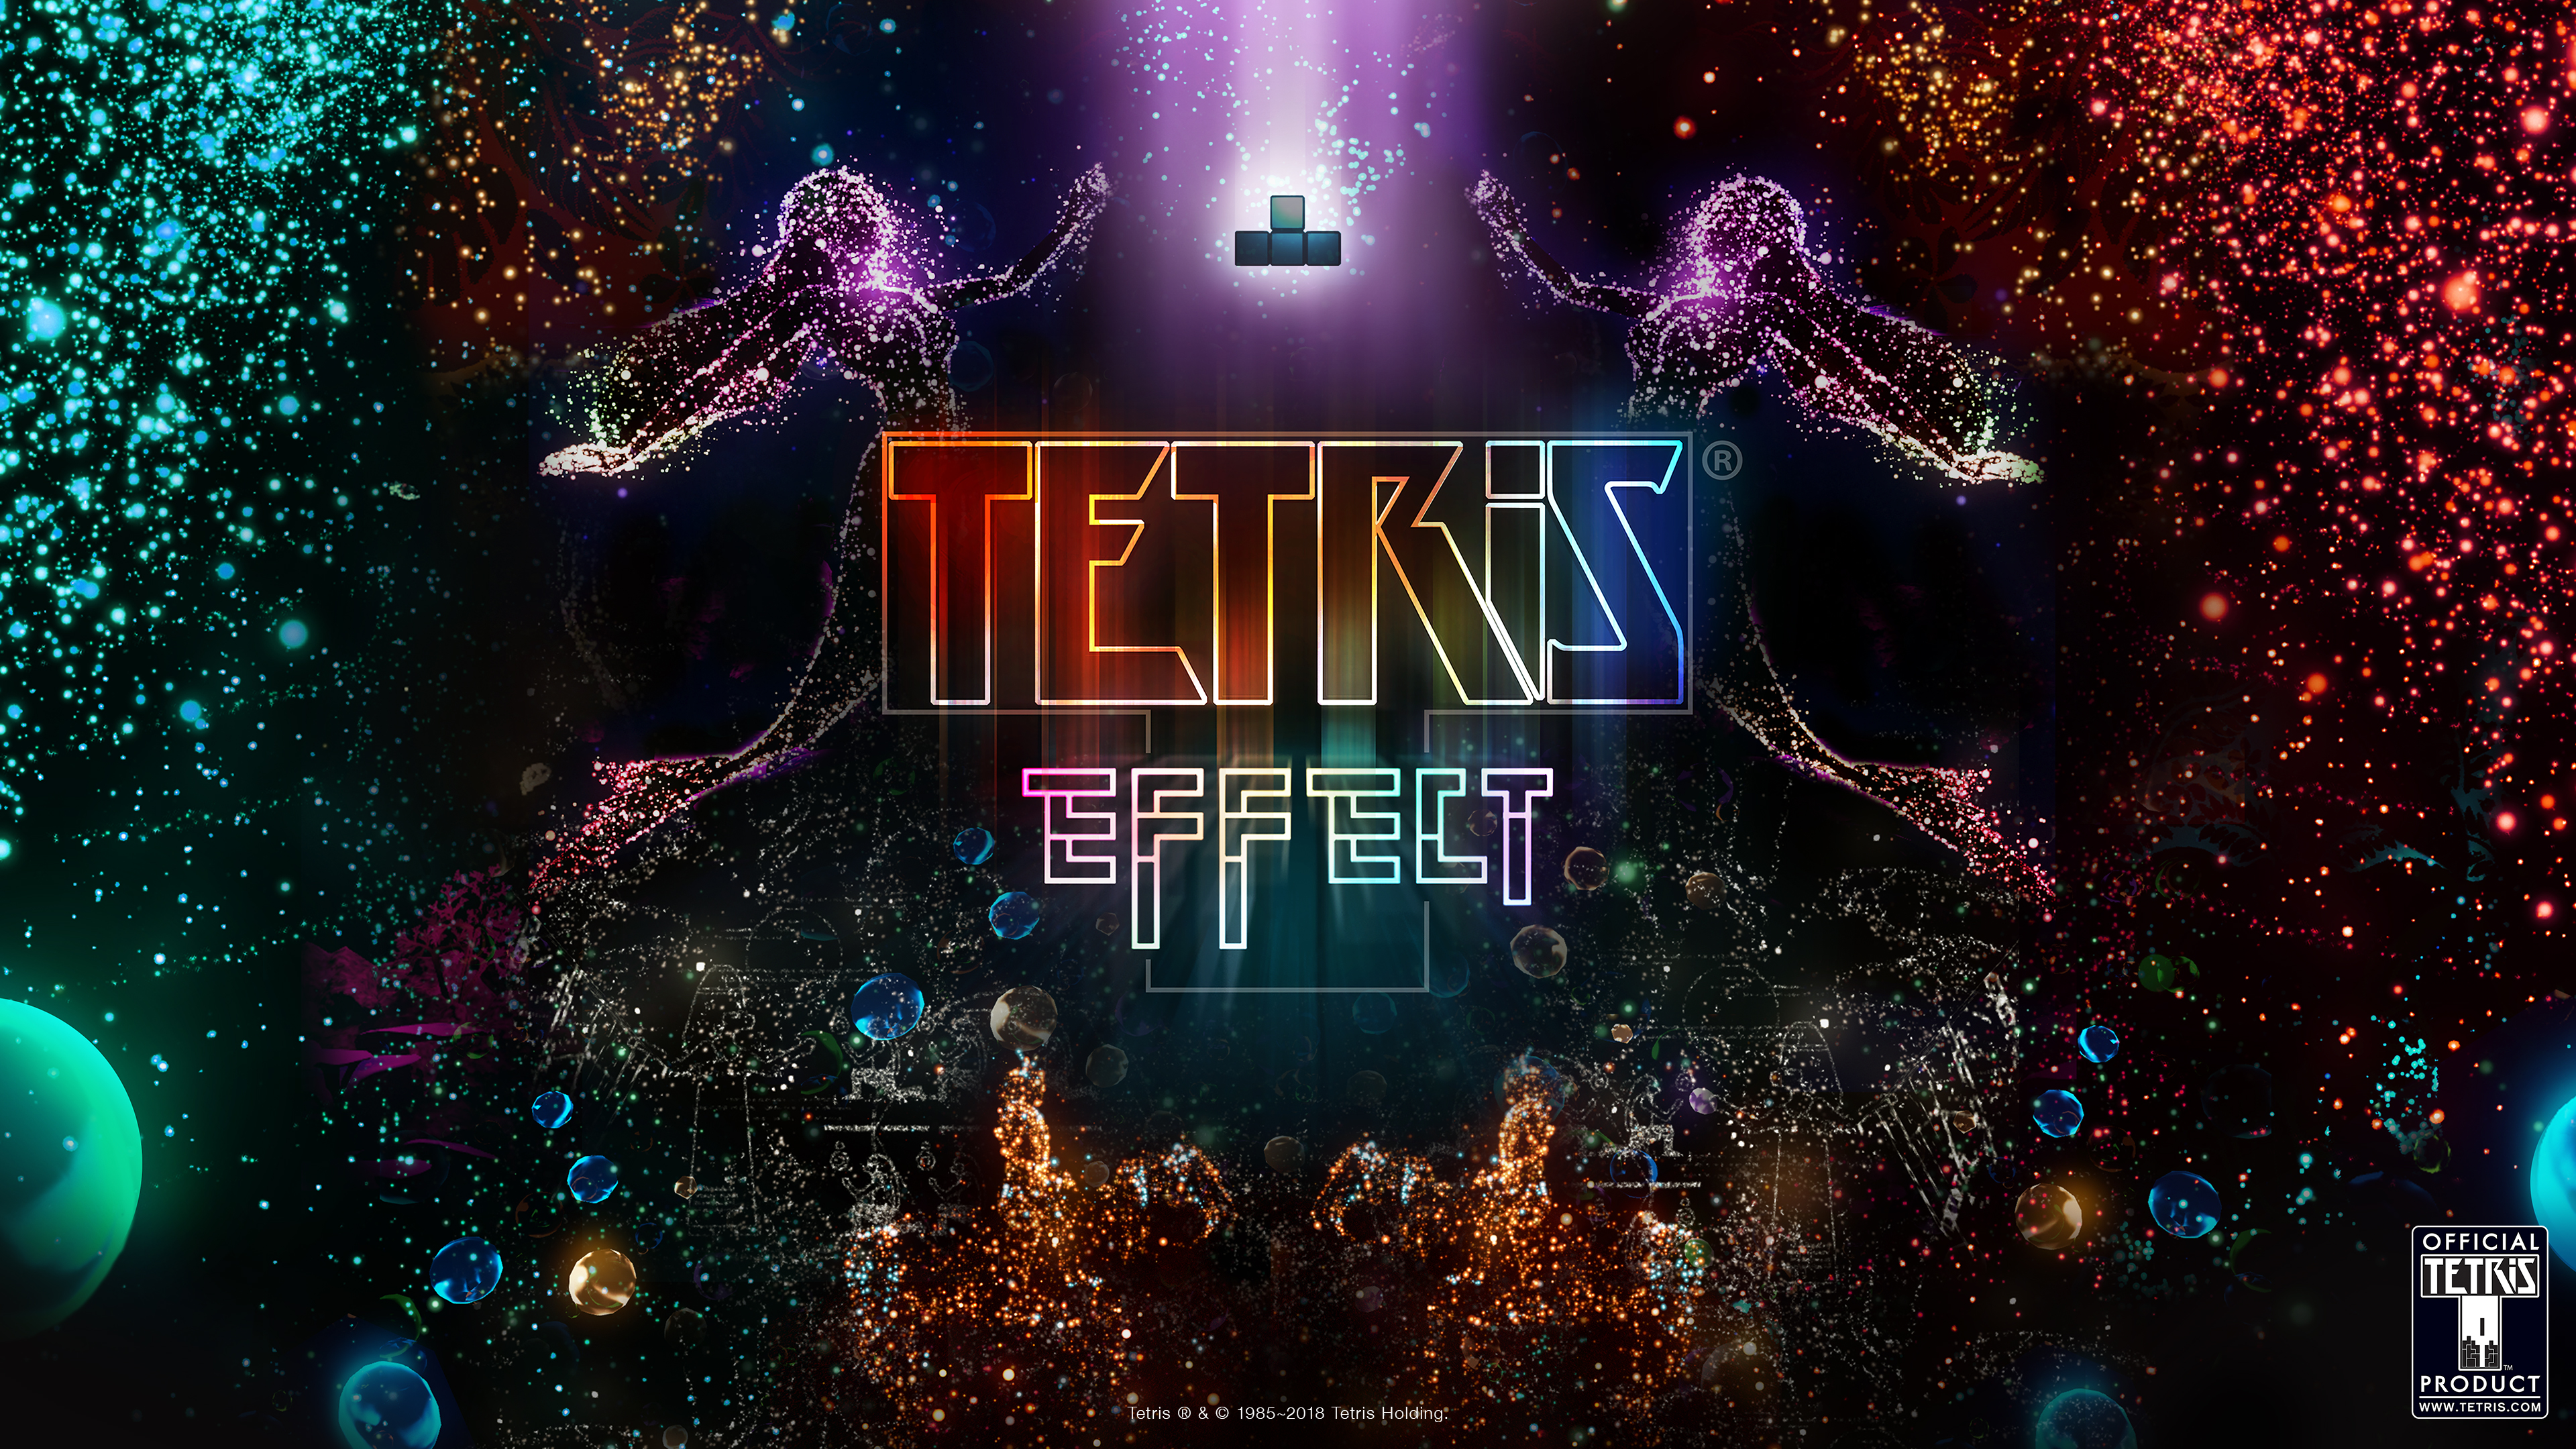 Tetris Effect Review - Experience Tranquility - The Koalition3840 x 2160